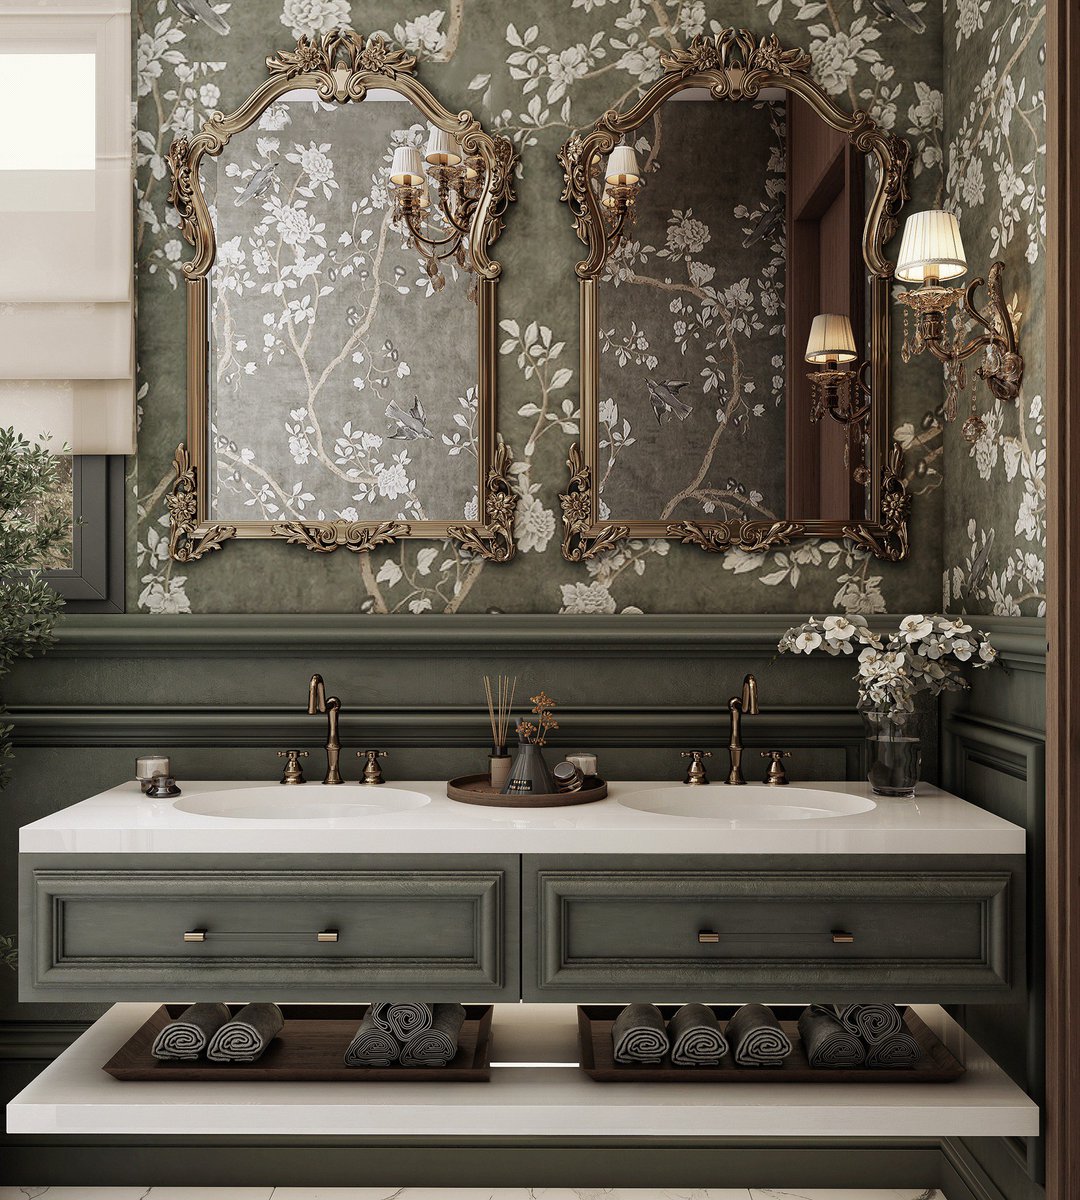 Perfect for springtime bathroom decor. Want to have a bathroom like this? The breath of life blooms in every detail #bathroom #housedecor #homedecor #bathroomdesign #spring #Spring2024